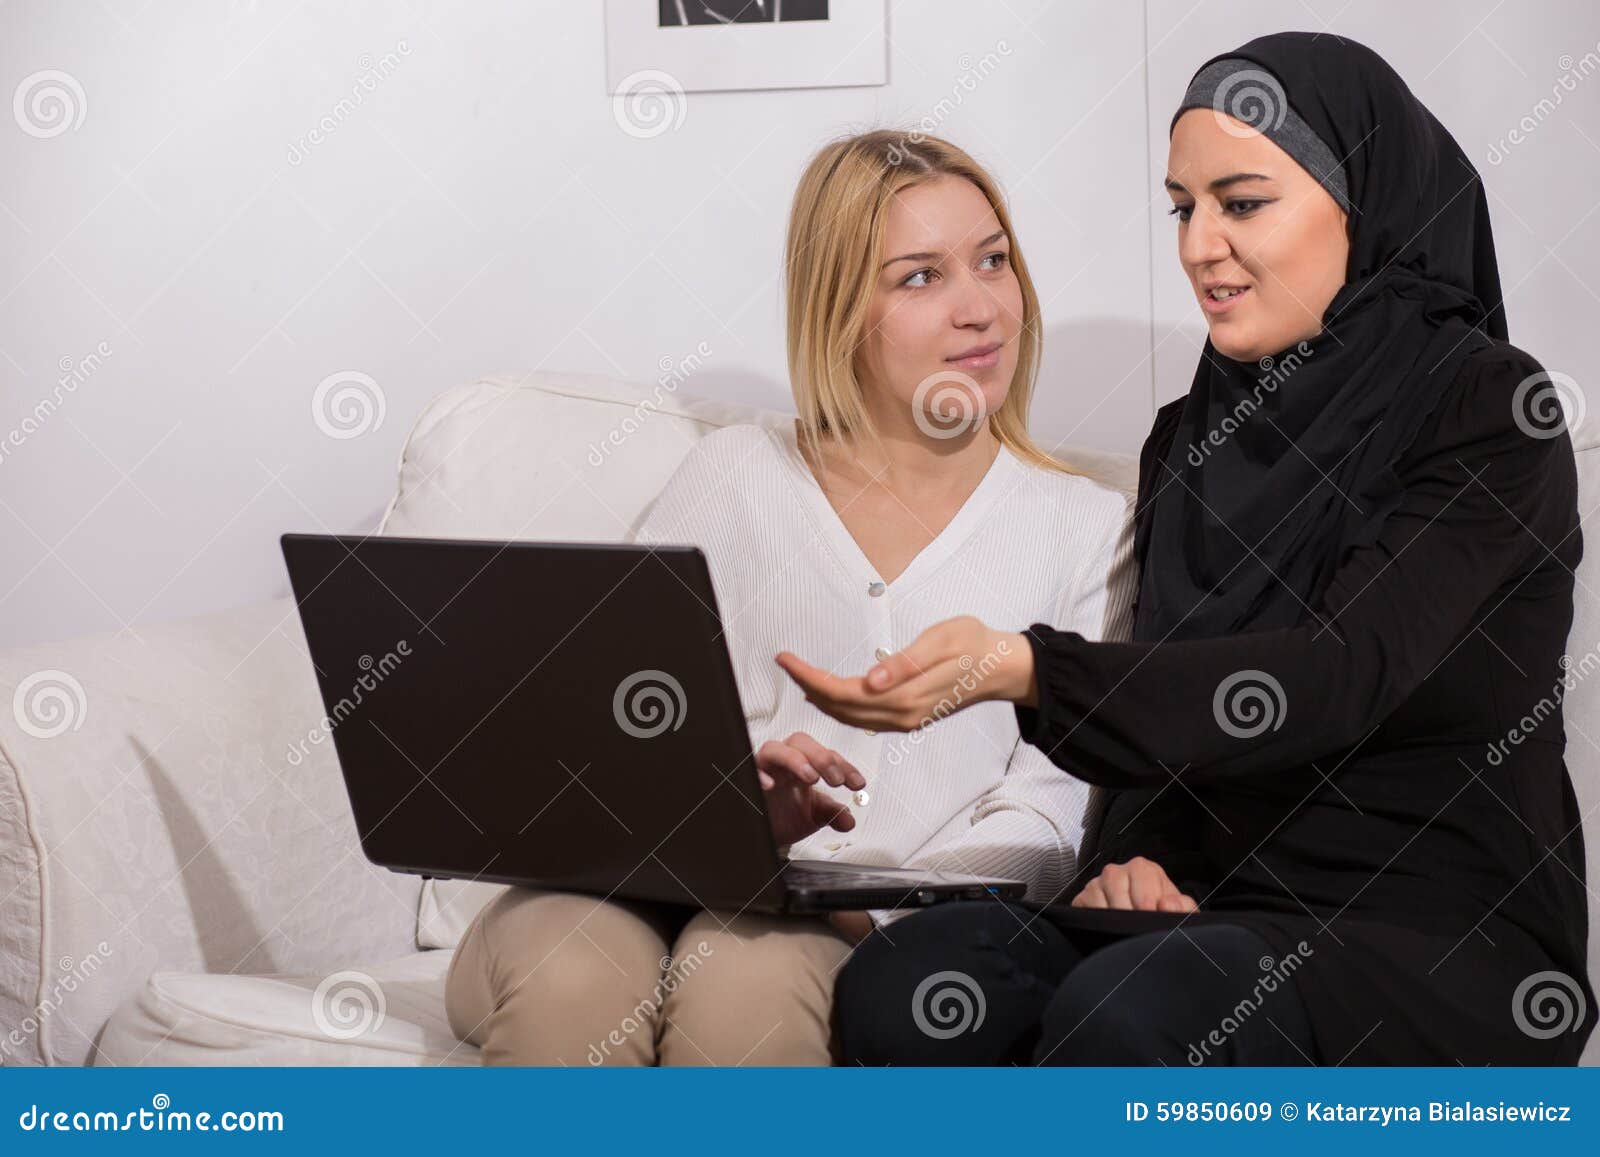 arab immigrant talking with her family